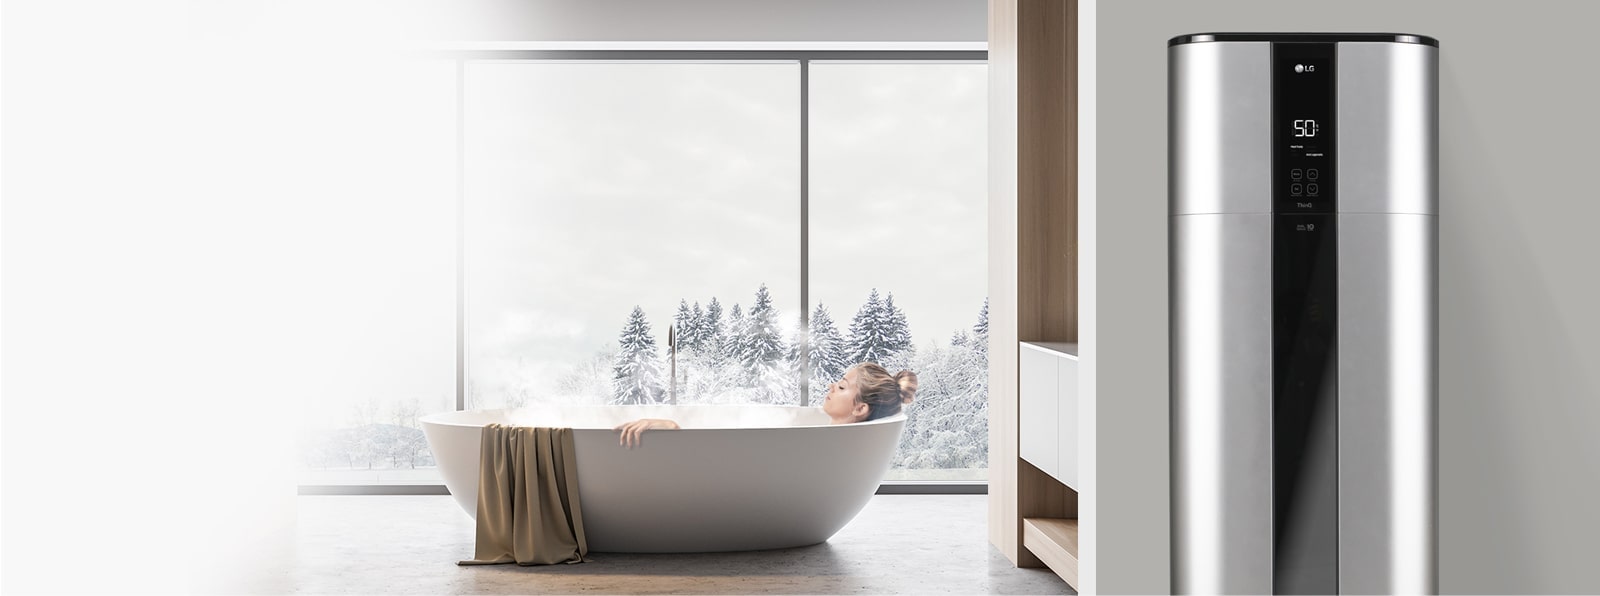 A person luxuriates in a steamy bathtub on the left, with a metallic LG water heater showcasing on the right side.